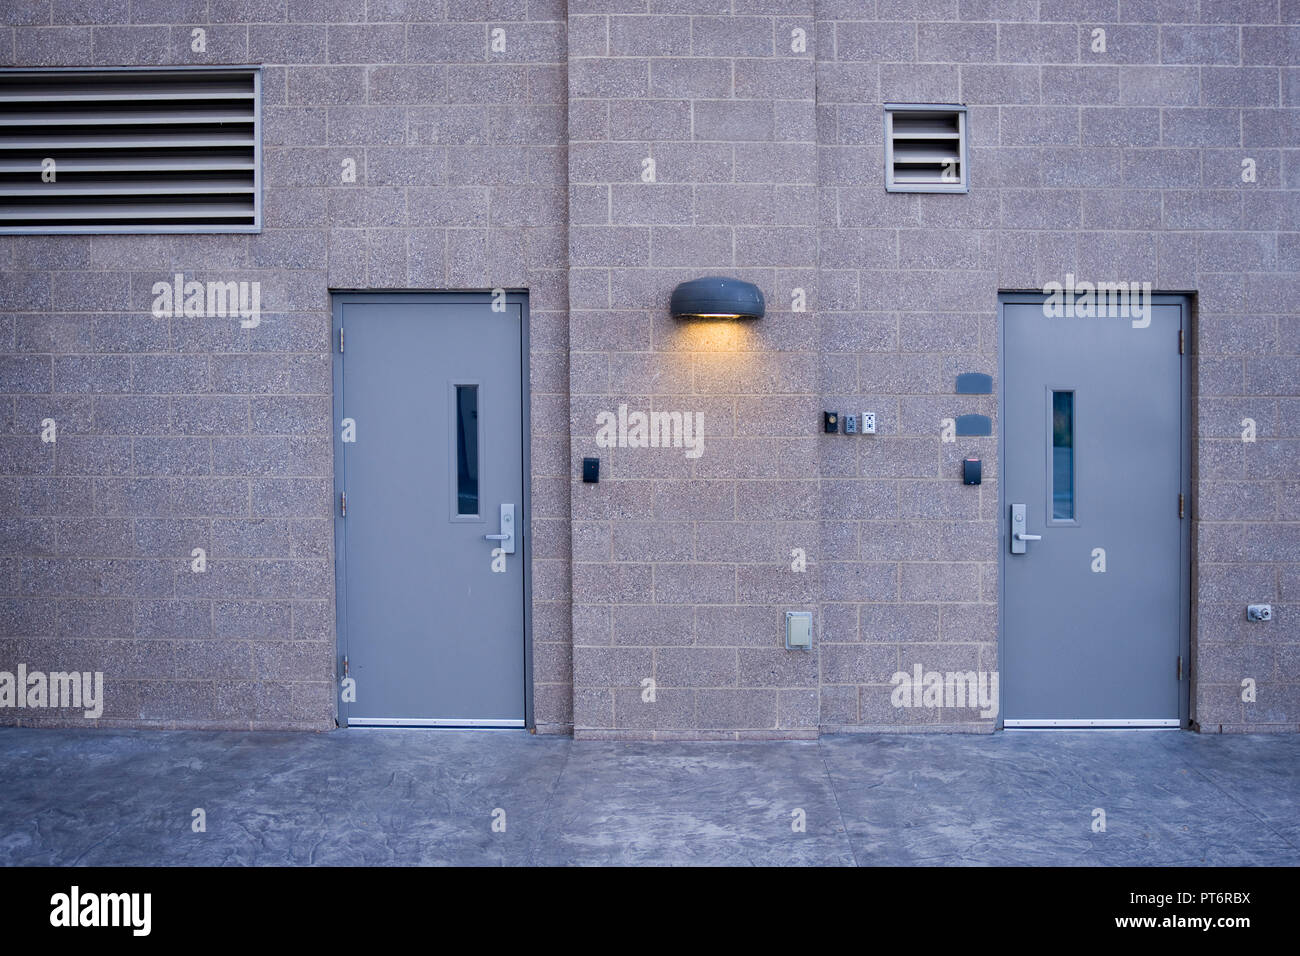 Industrial facility with secure doors, vents and security light. Stock Photo